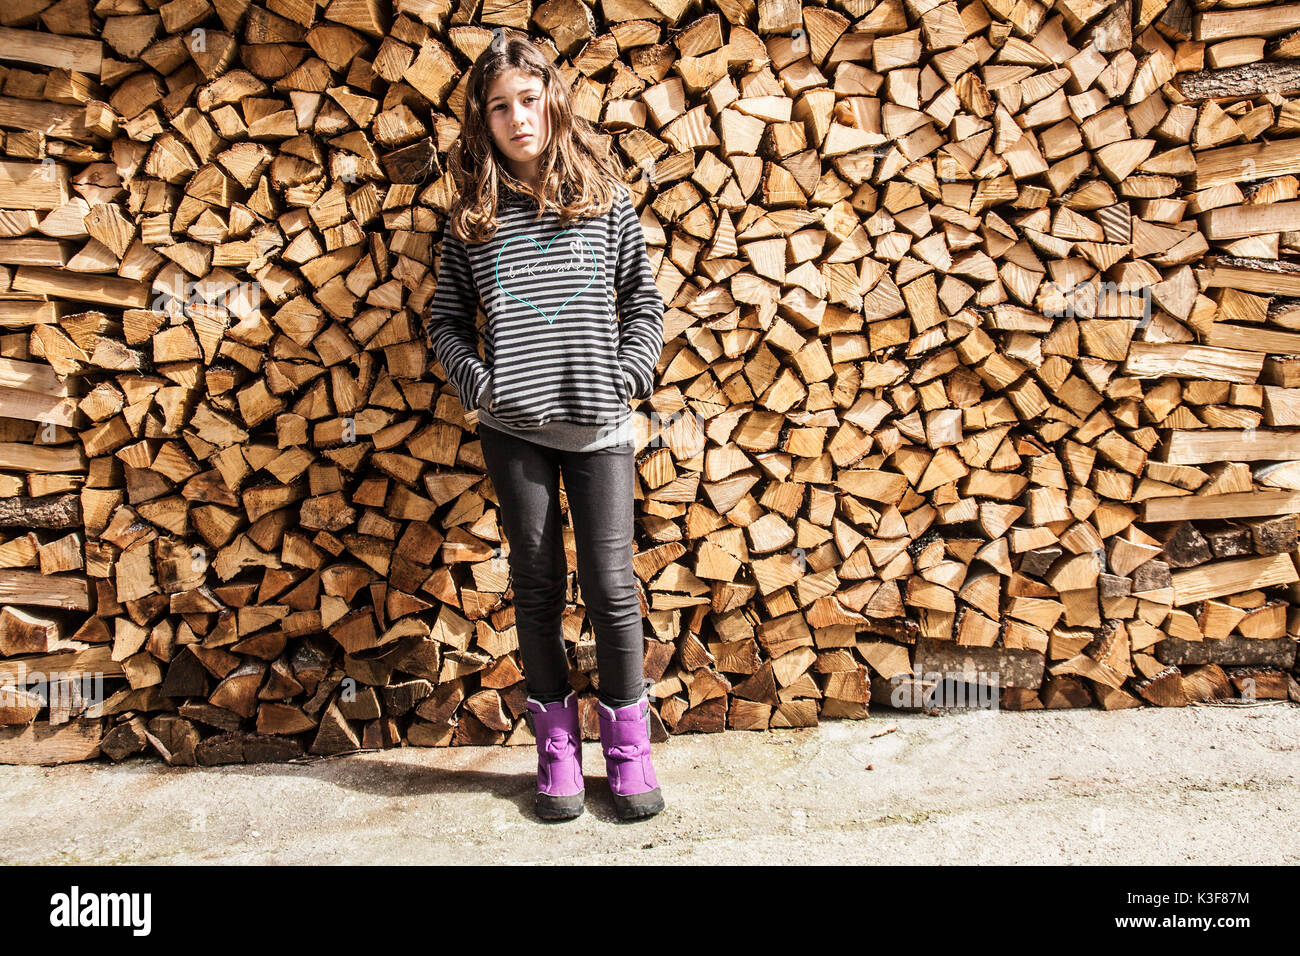 Full-Length Portrait of Serious Girl Standing in Front of Firewood Stock Photo